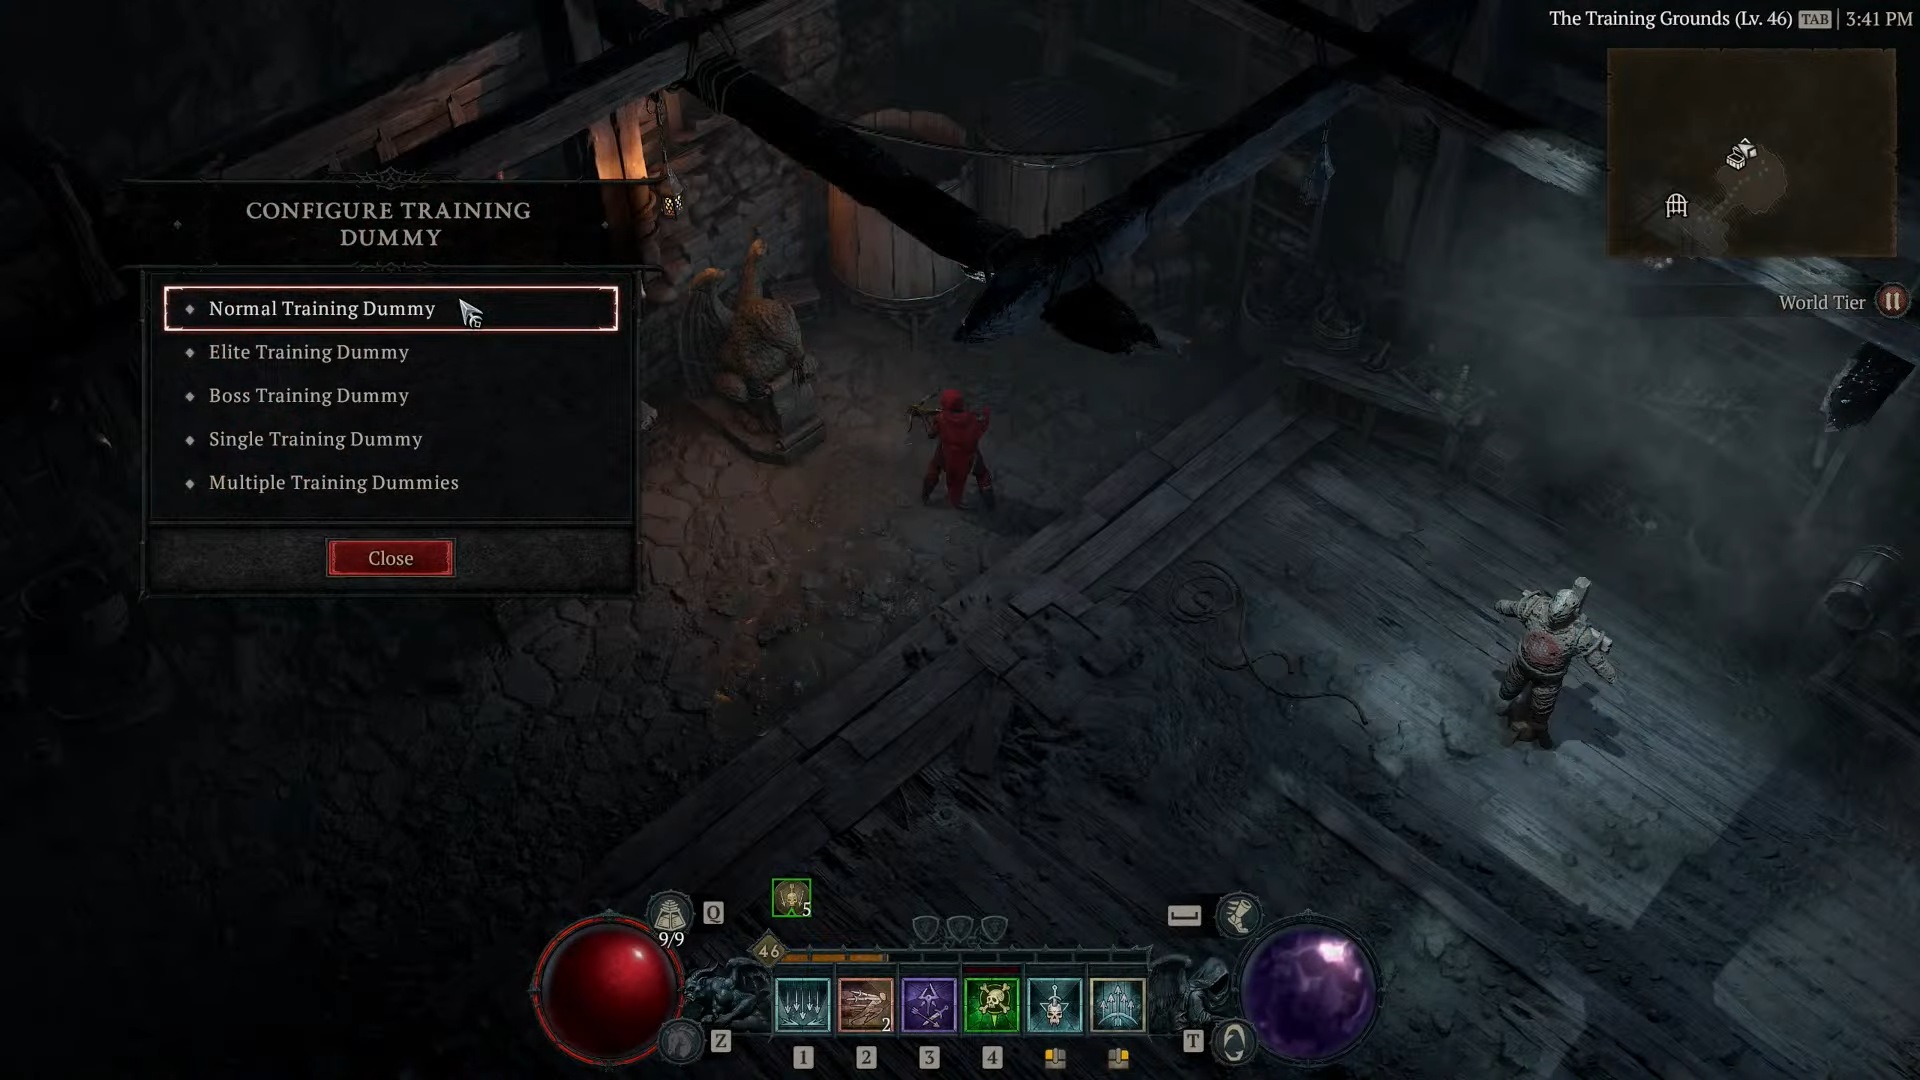 Diablo 4 training dummy types screenshot from in-game